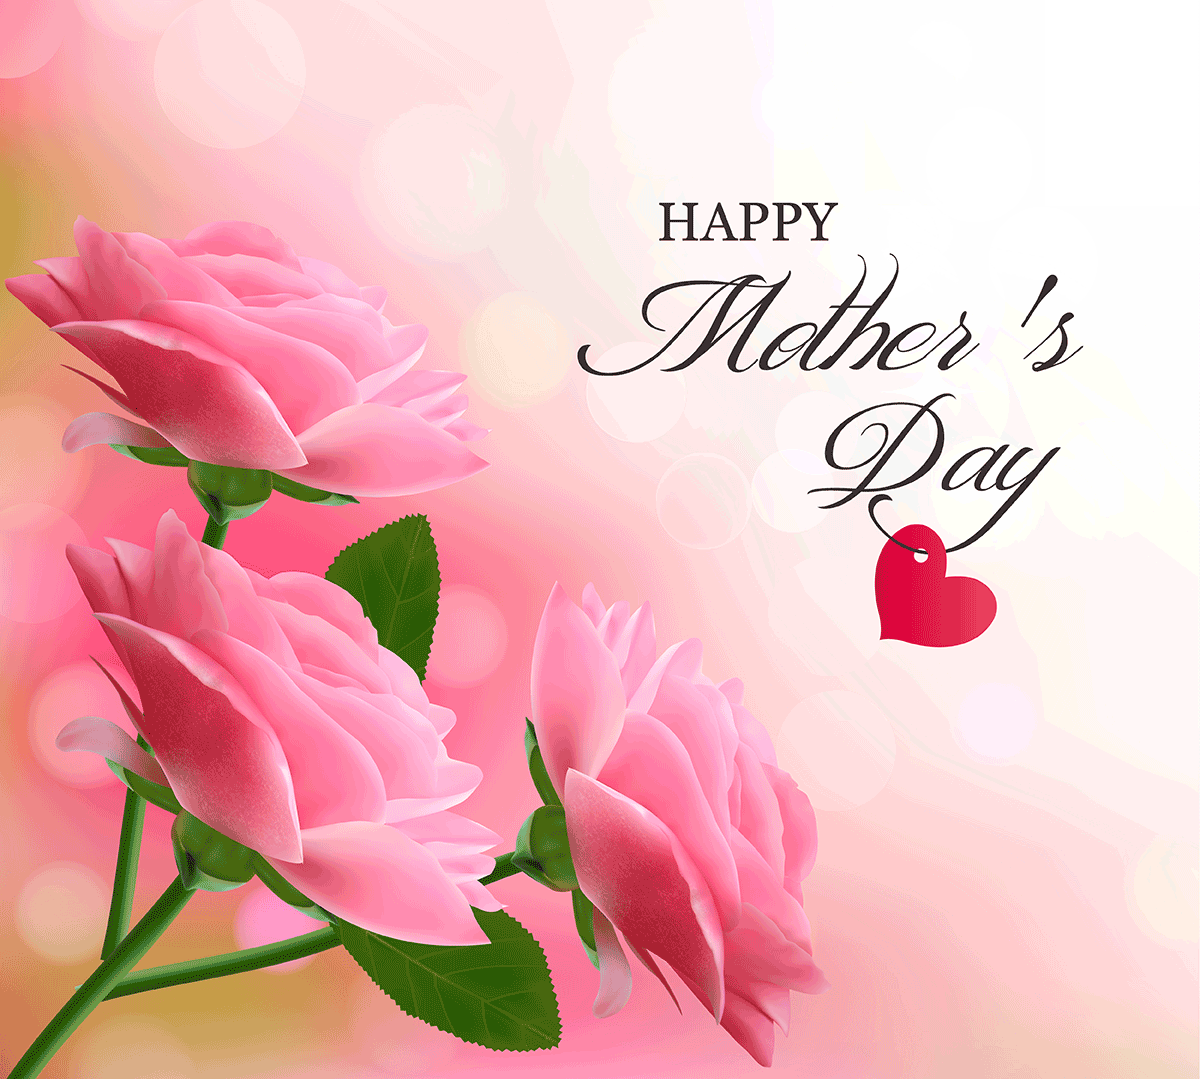 Happy Mother's Day. Happy mothers day image, Happy mothers day picture, Mothers day image